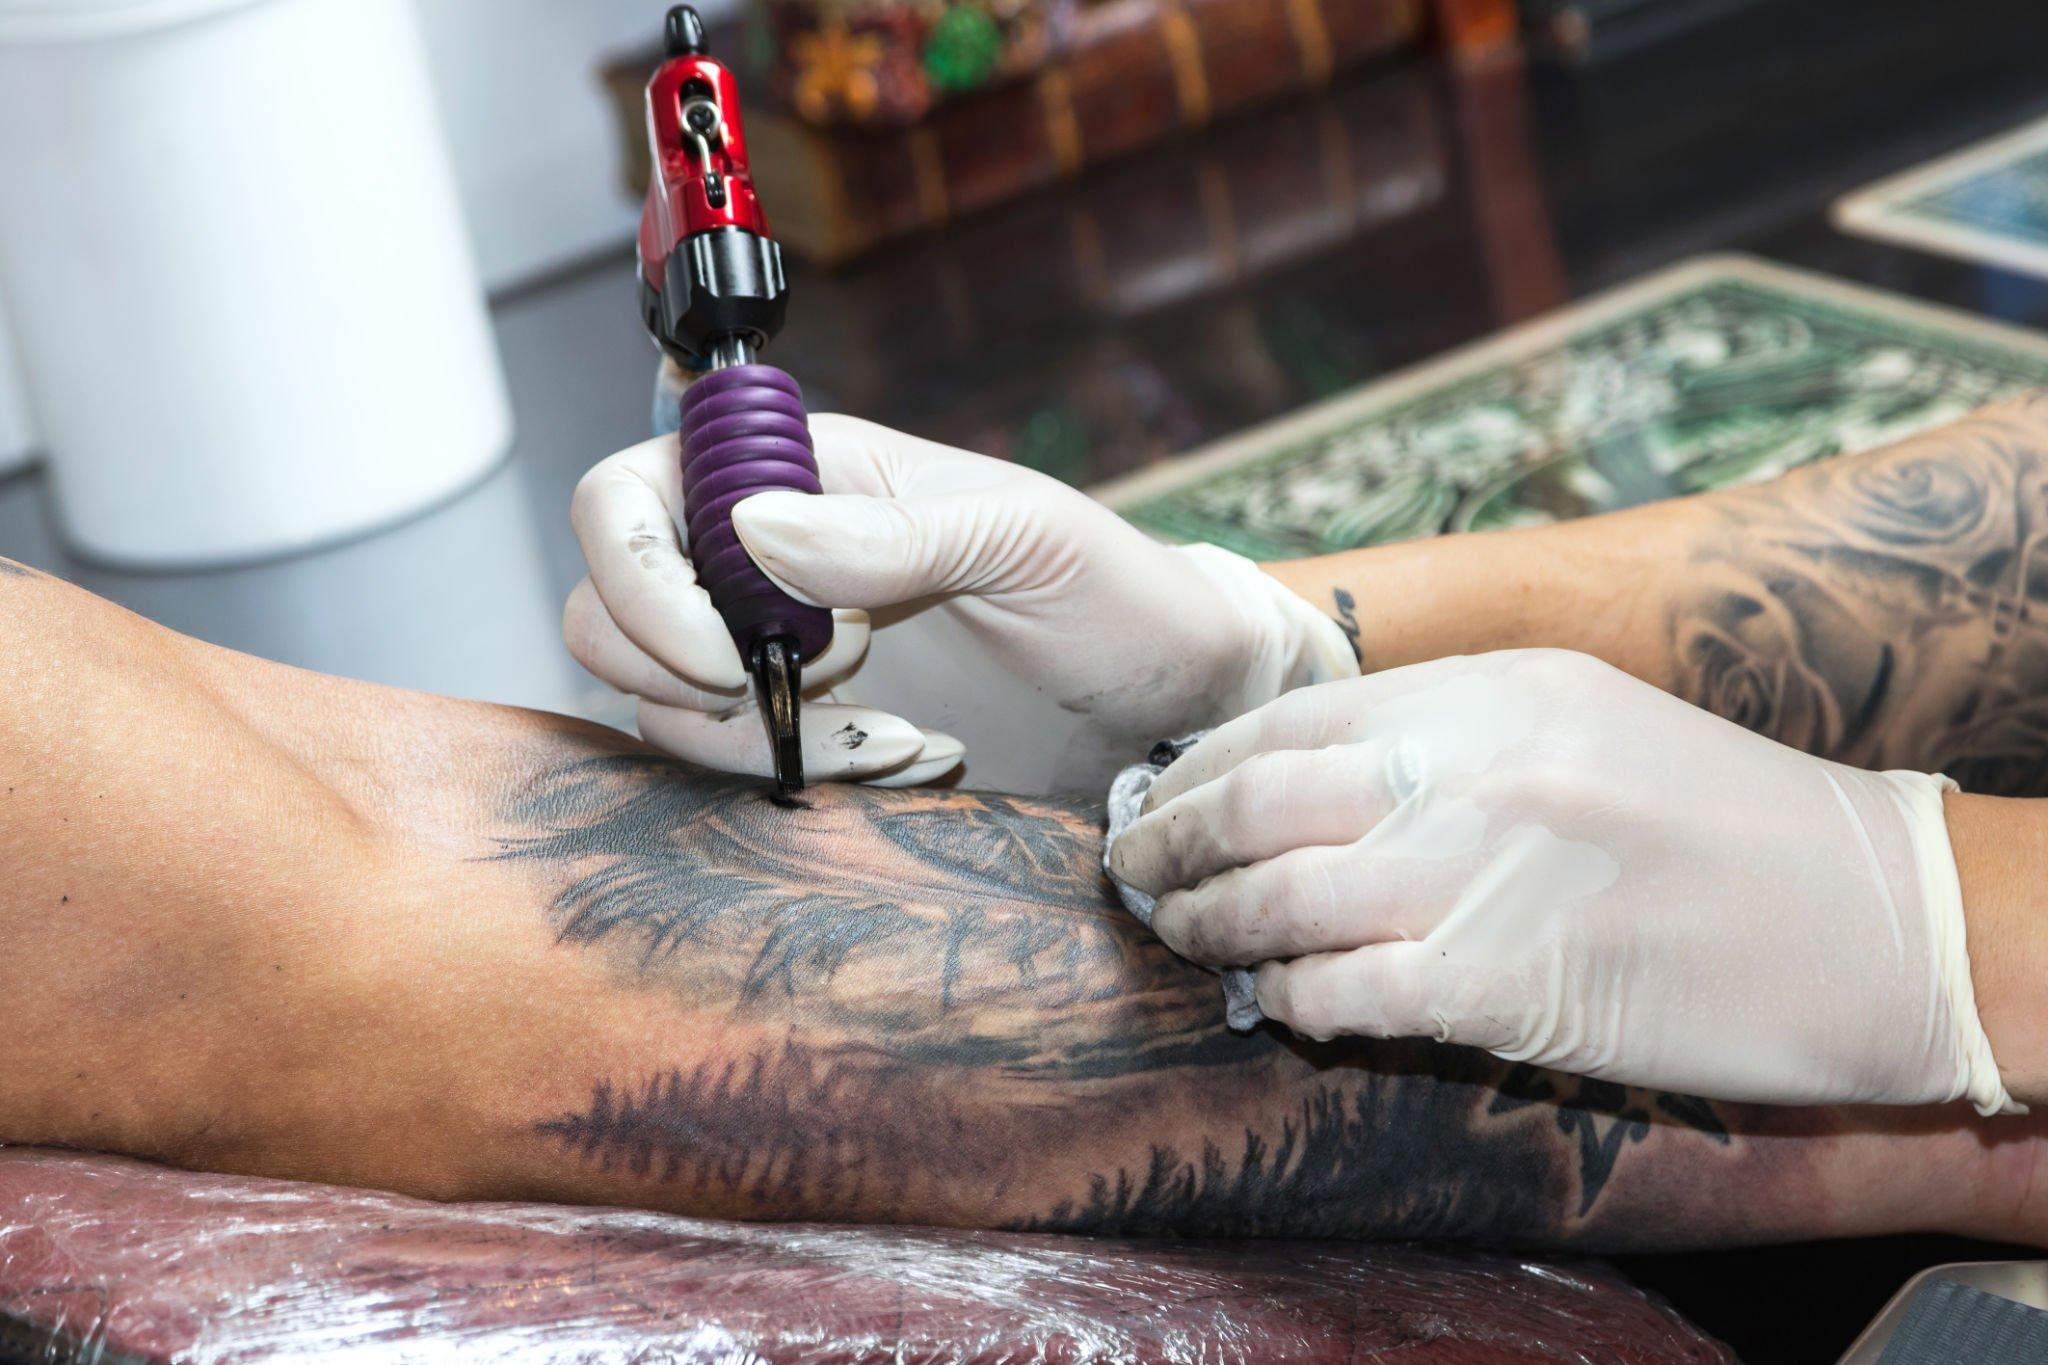 Some Classic Tattoo Styles You Need To Know Before Getting One on Yourself